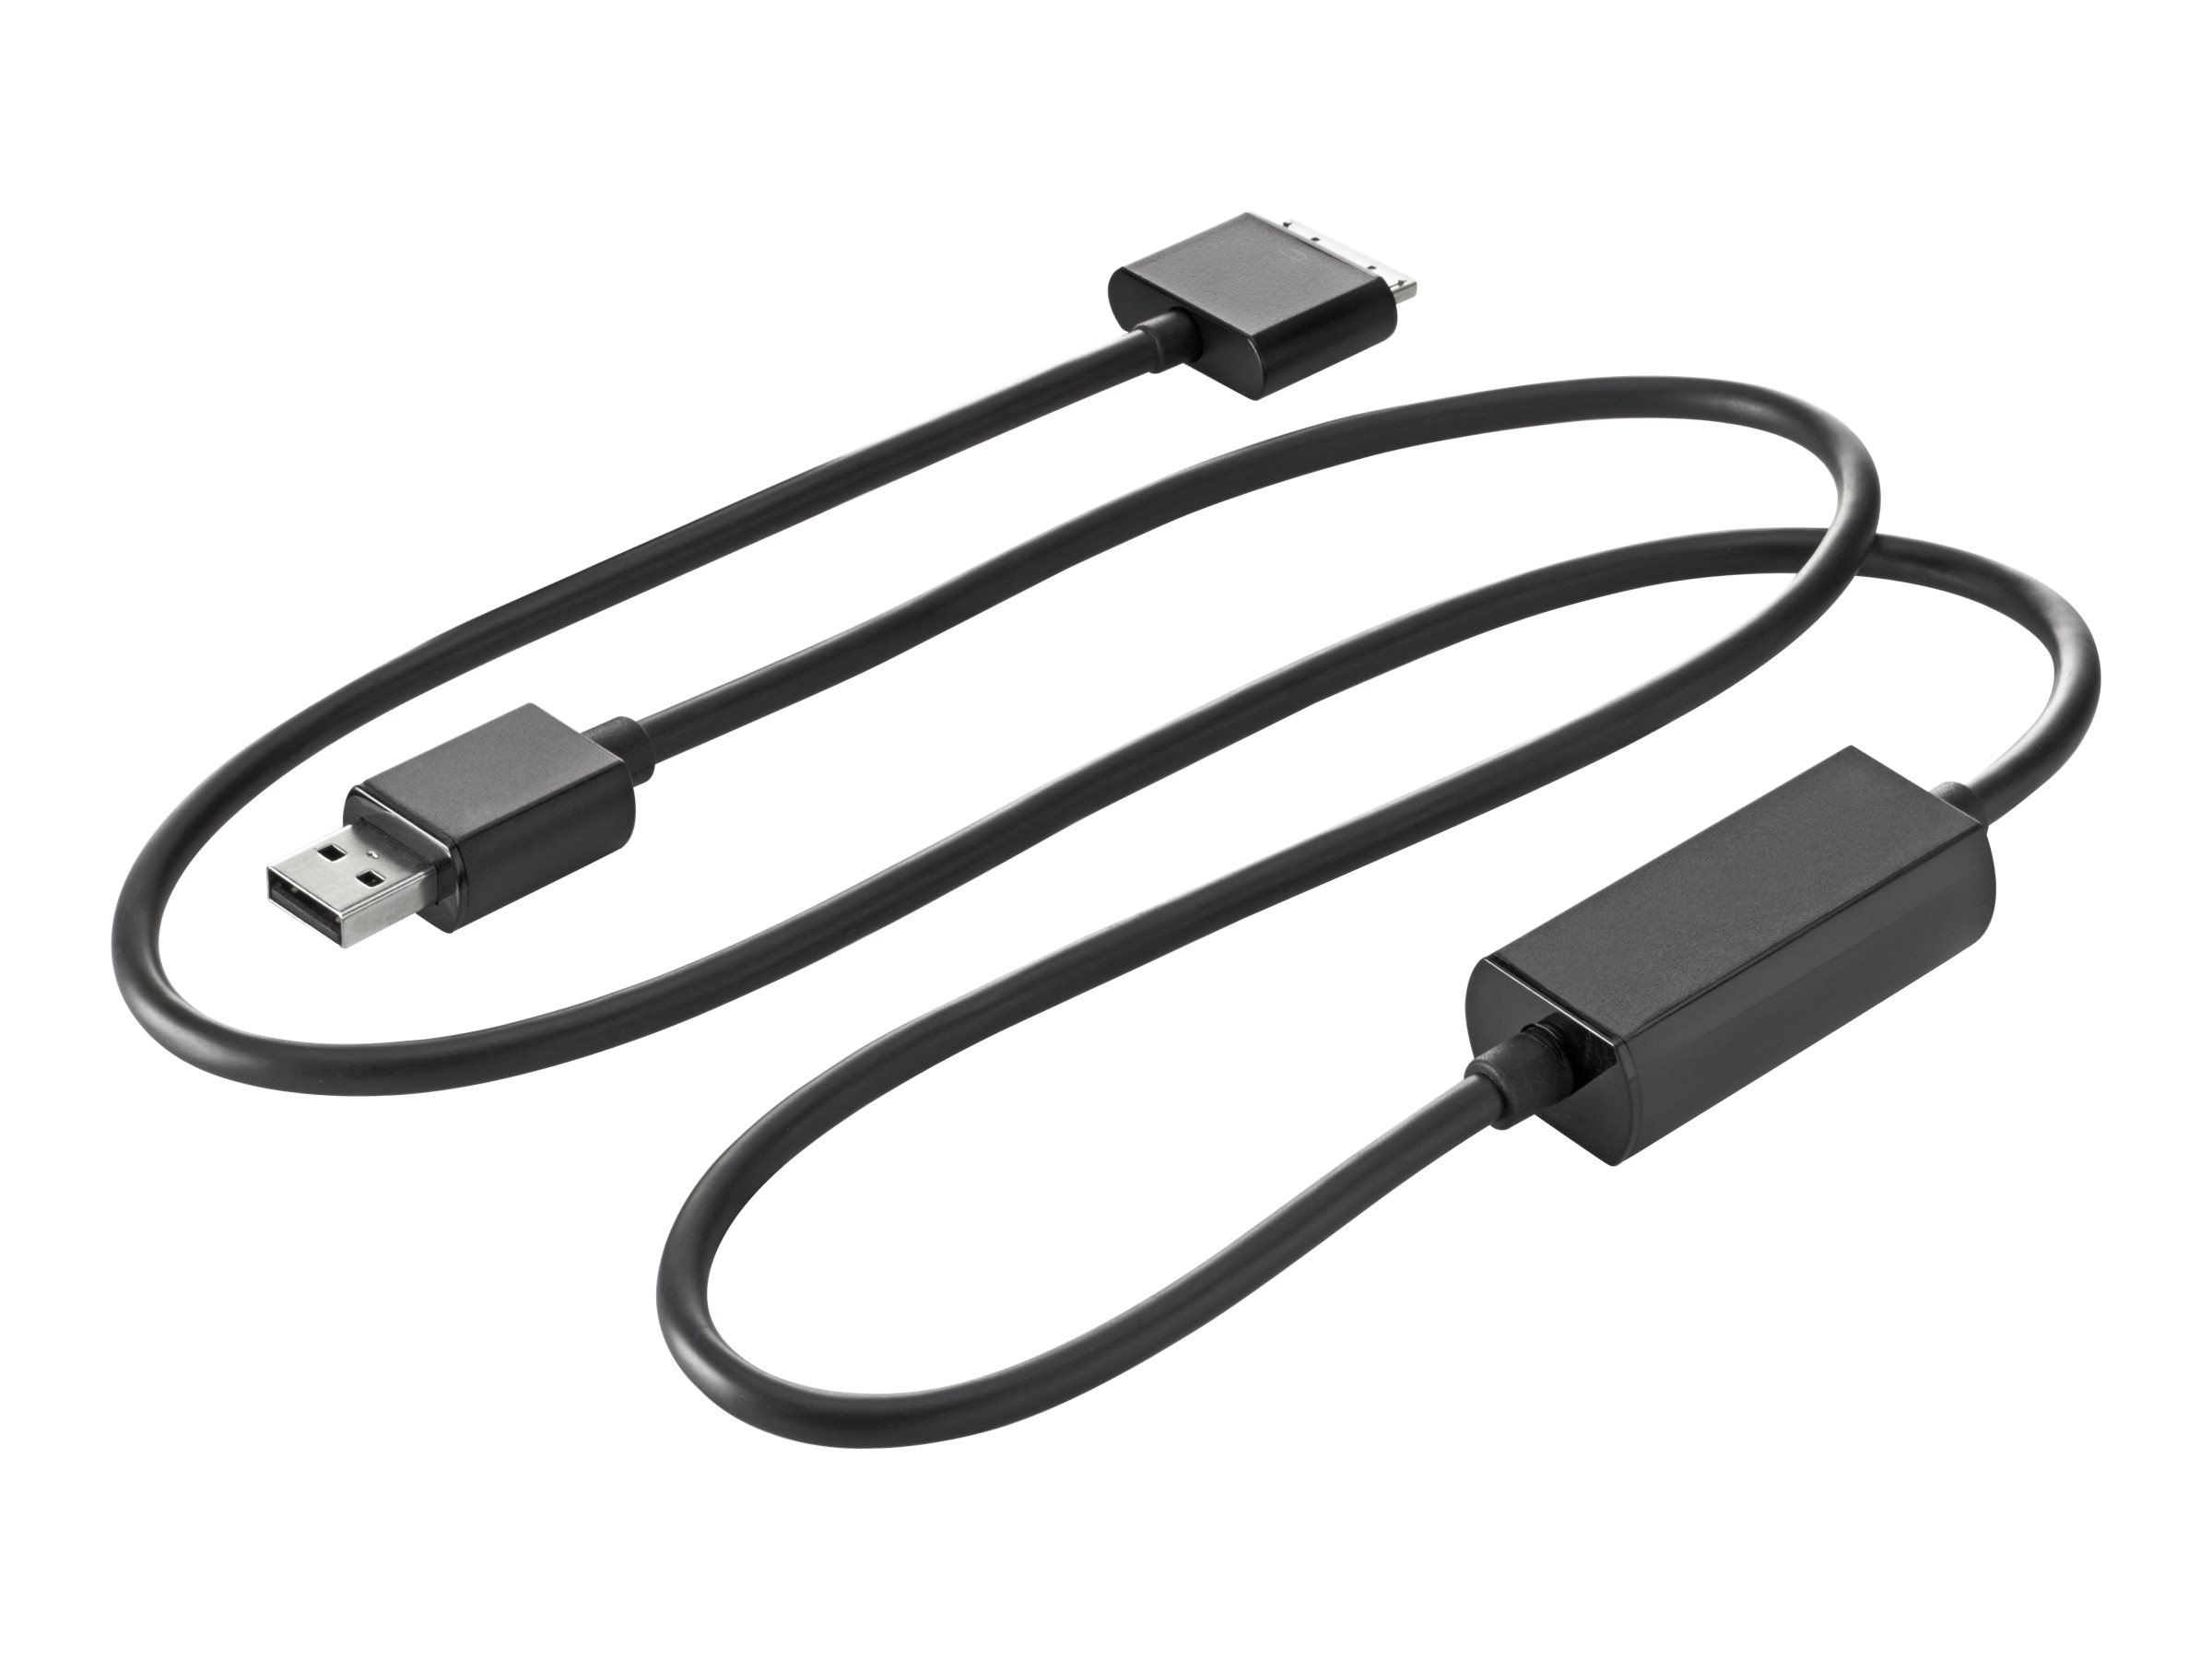 HP ElitePad USB (24 pack) Charging Cable - image 3 of 3